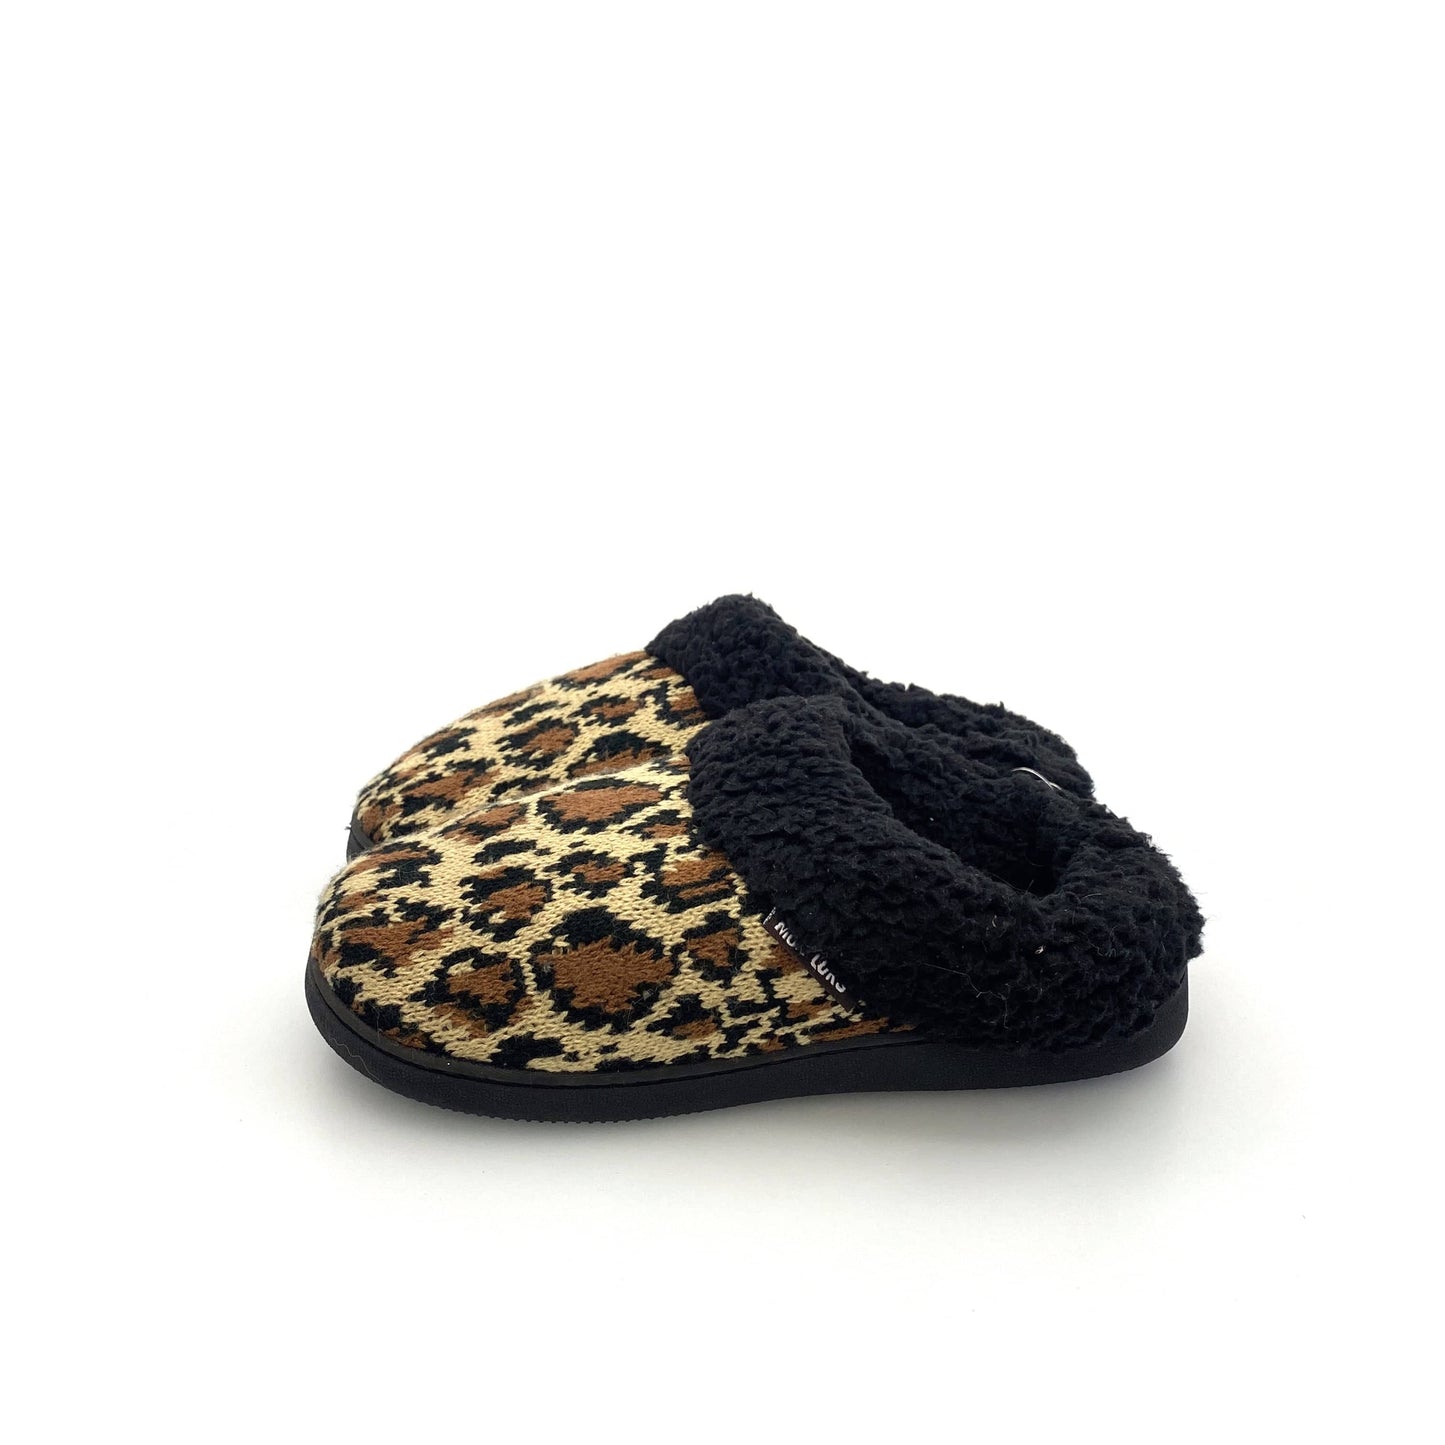 Muk Luks Womens Size M (7/8) Leopard Print Slippers Multicolor NWT